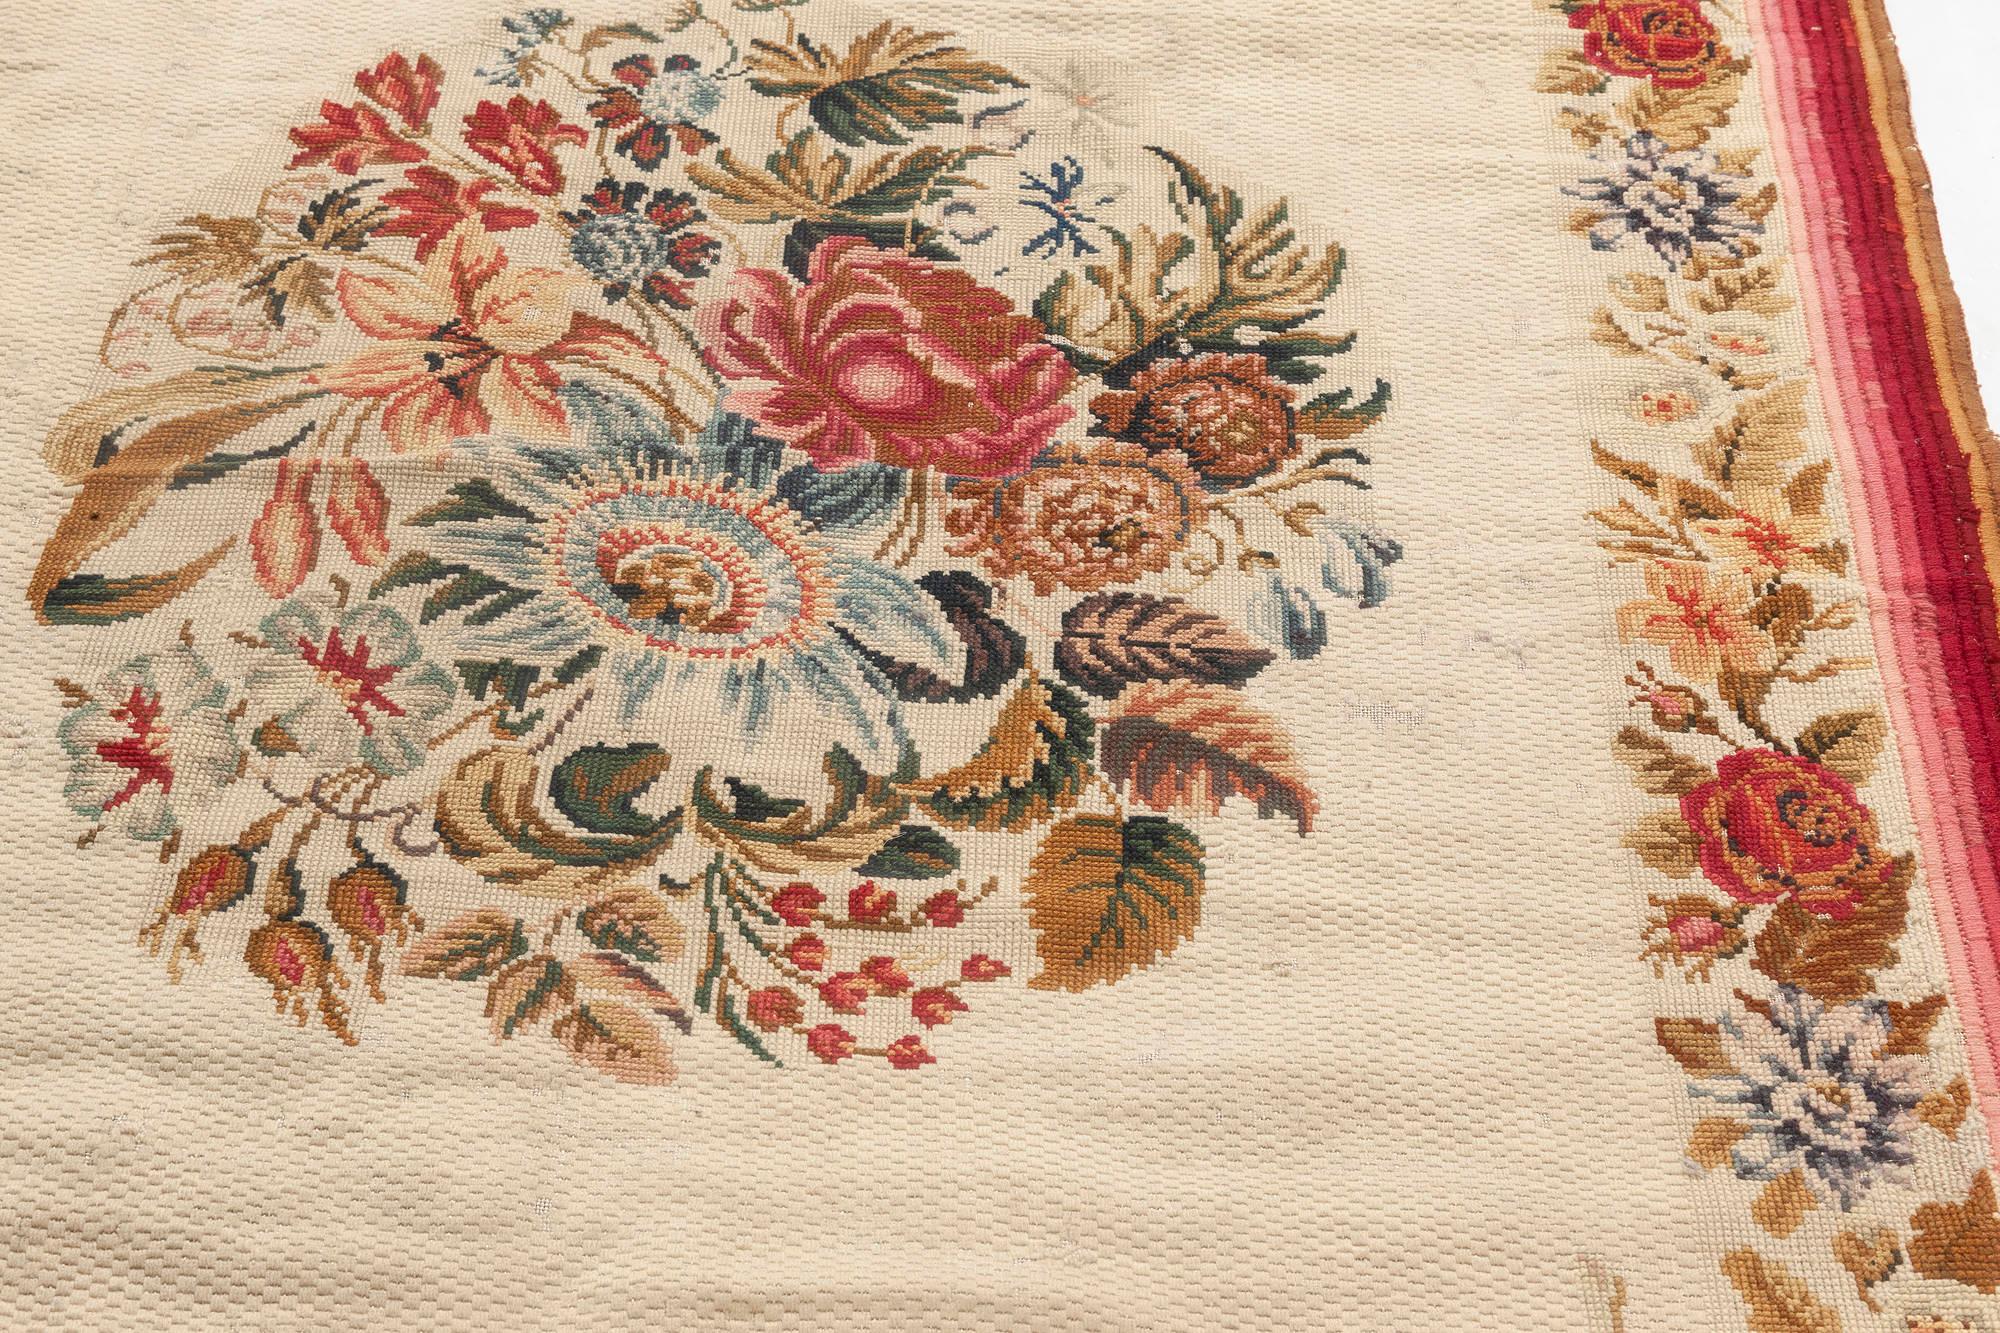 Early 20th Century English Floral Needlework Rug In Good Condition For Sale In New York, NY